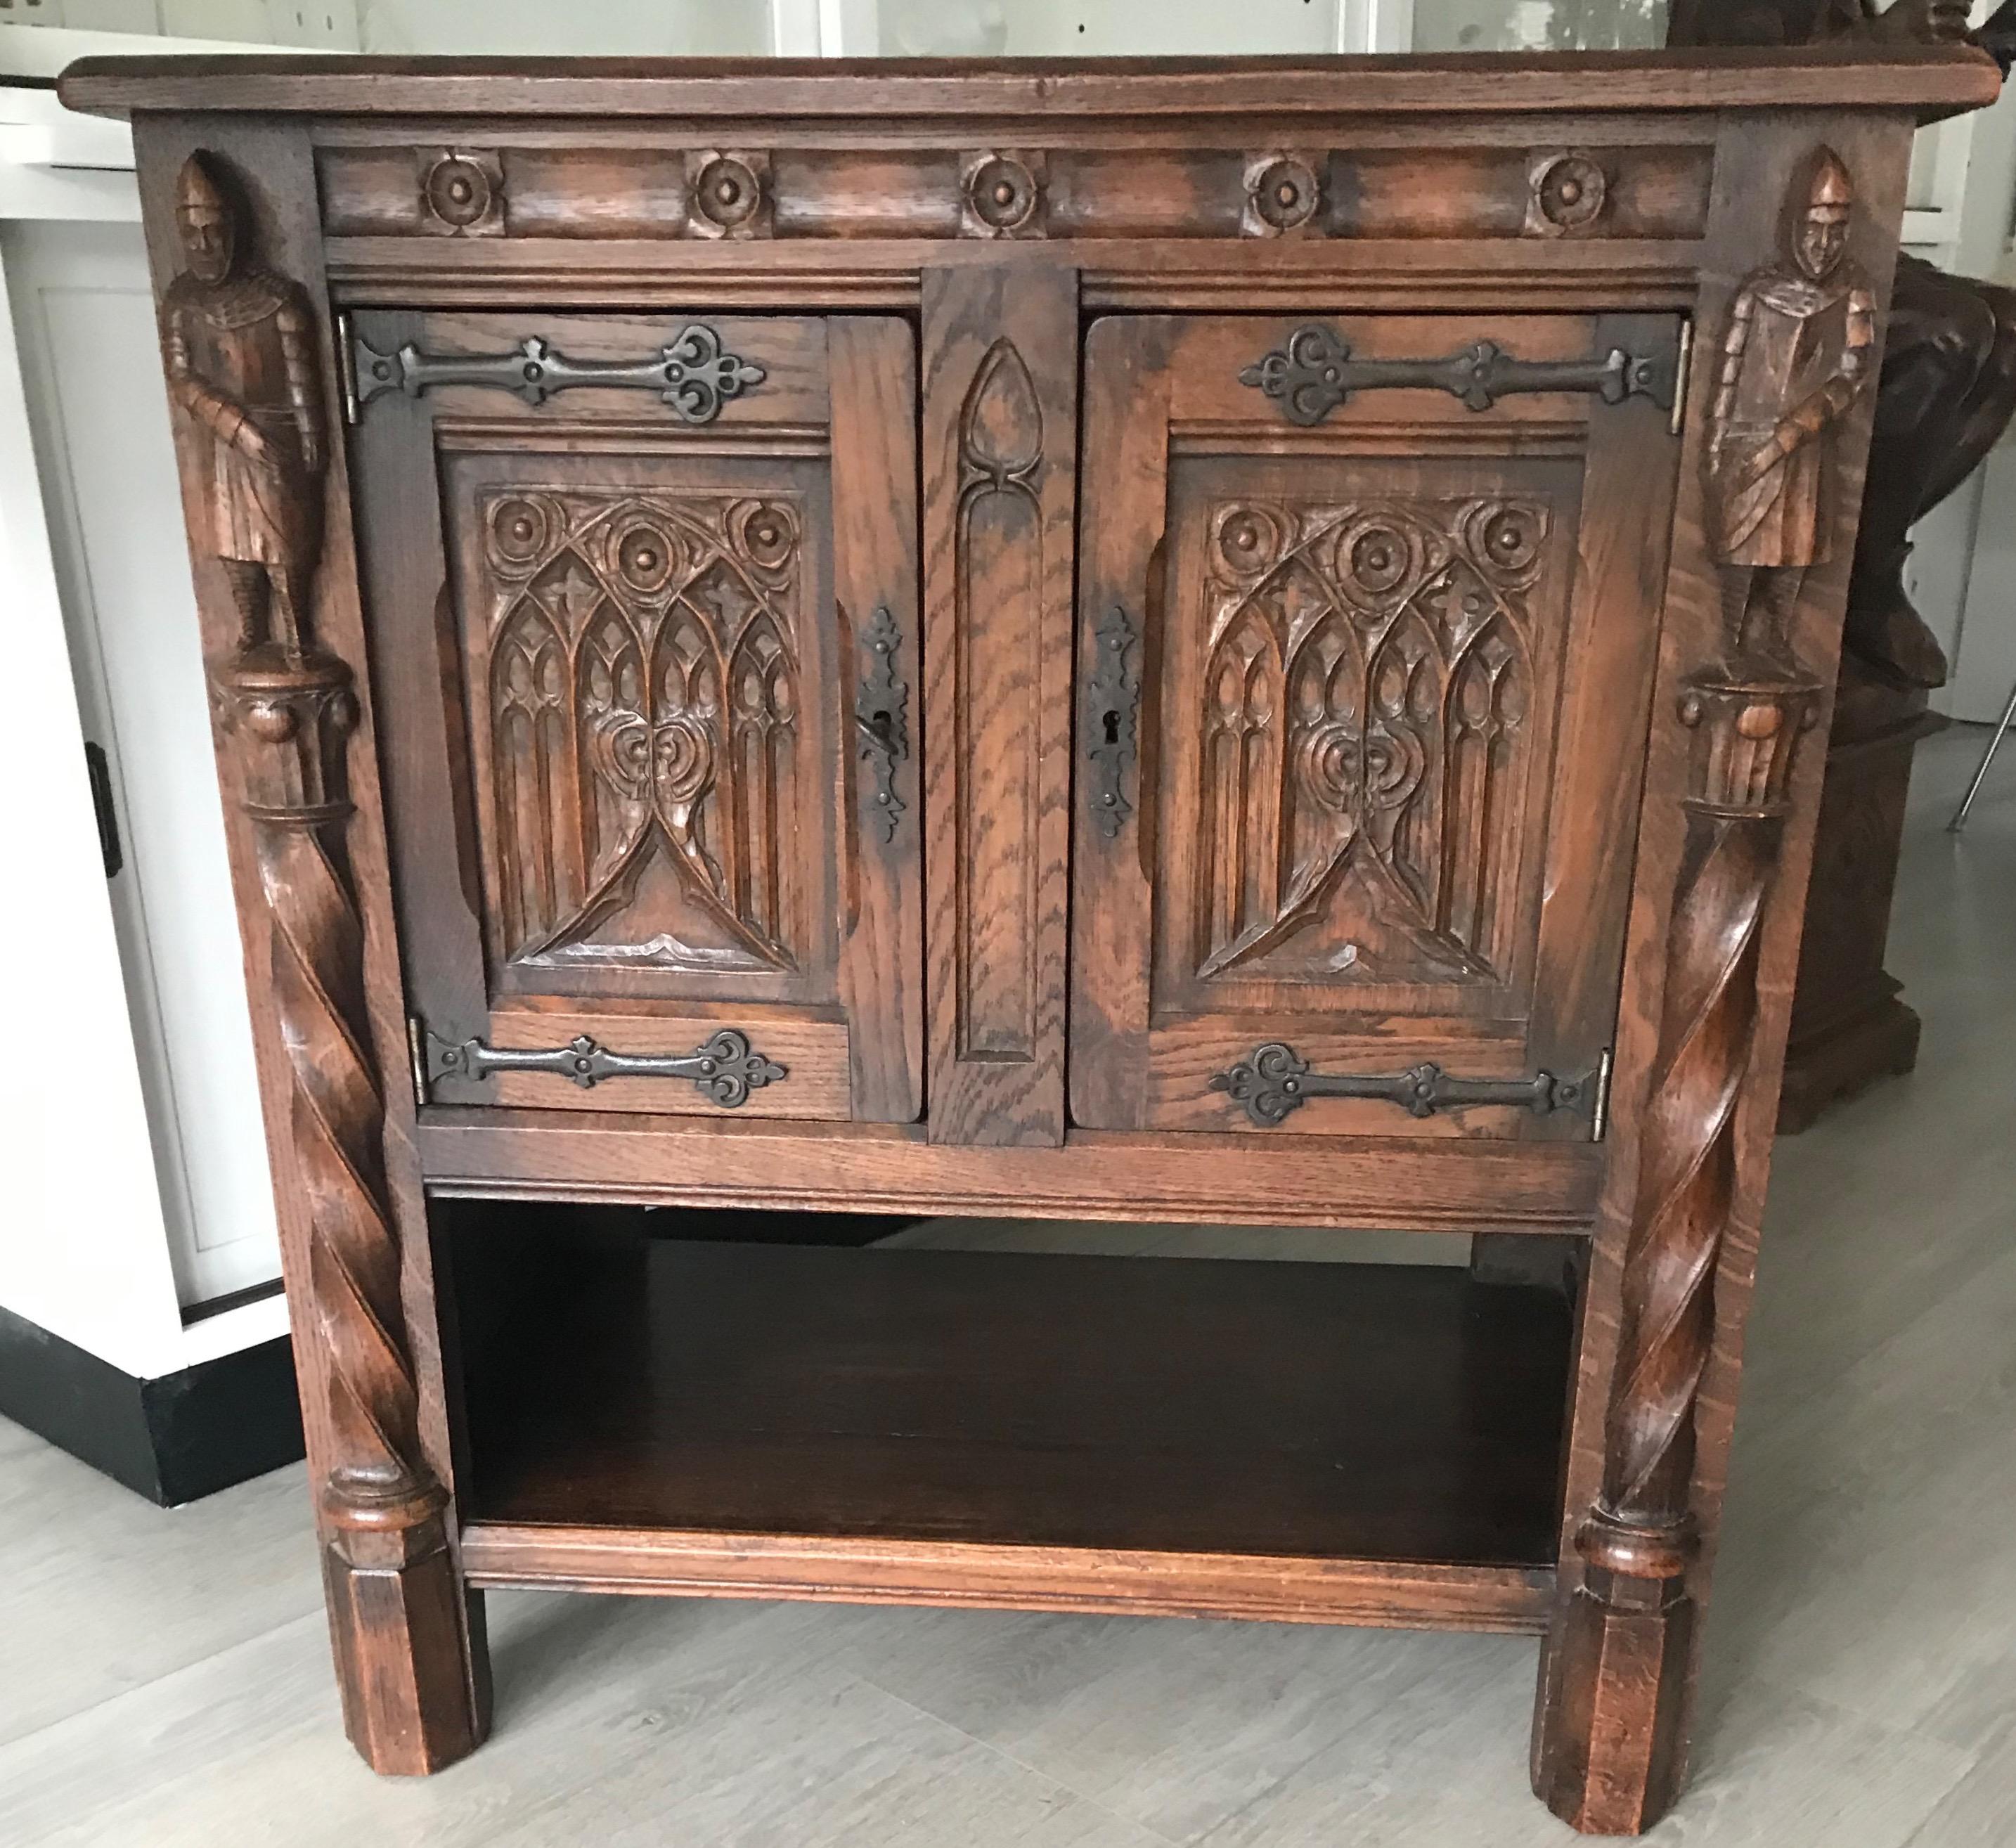 Hand-Crafted Early 20th Century Gothic Revival Carved Oak Drinks Cabinet / Dry Bar W. Knights